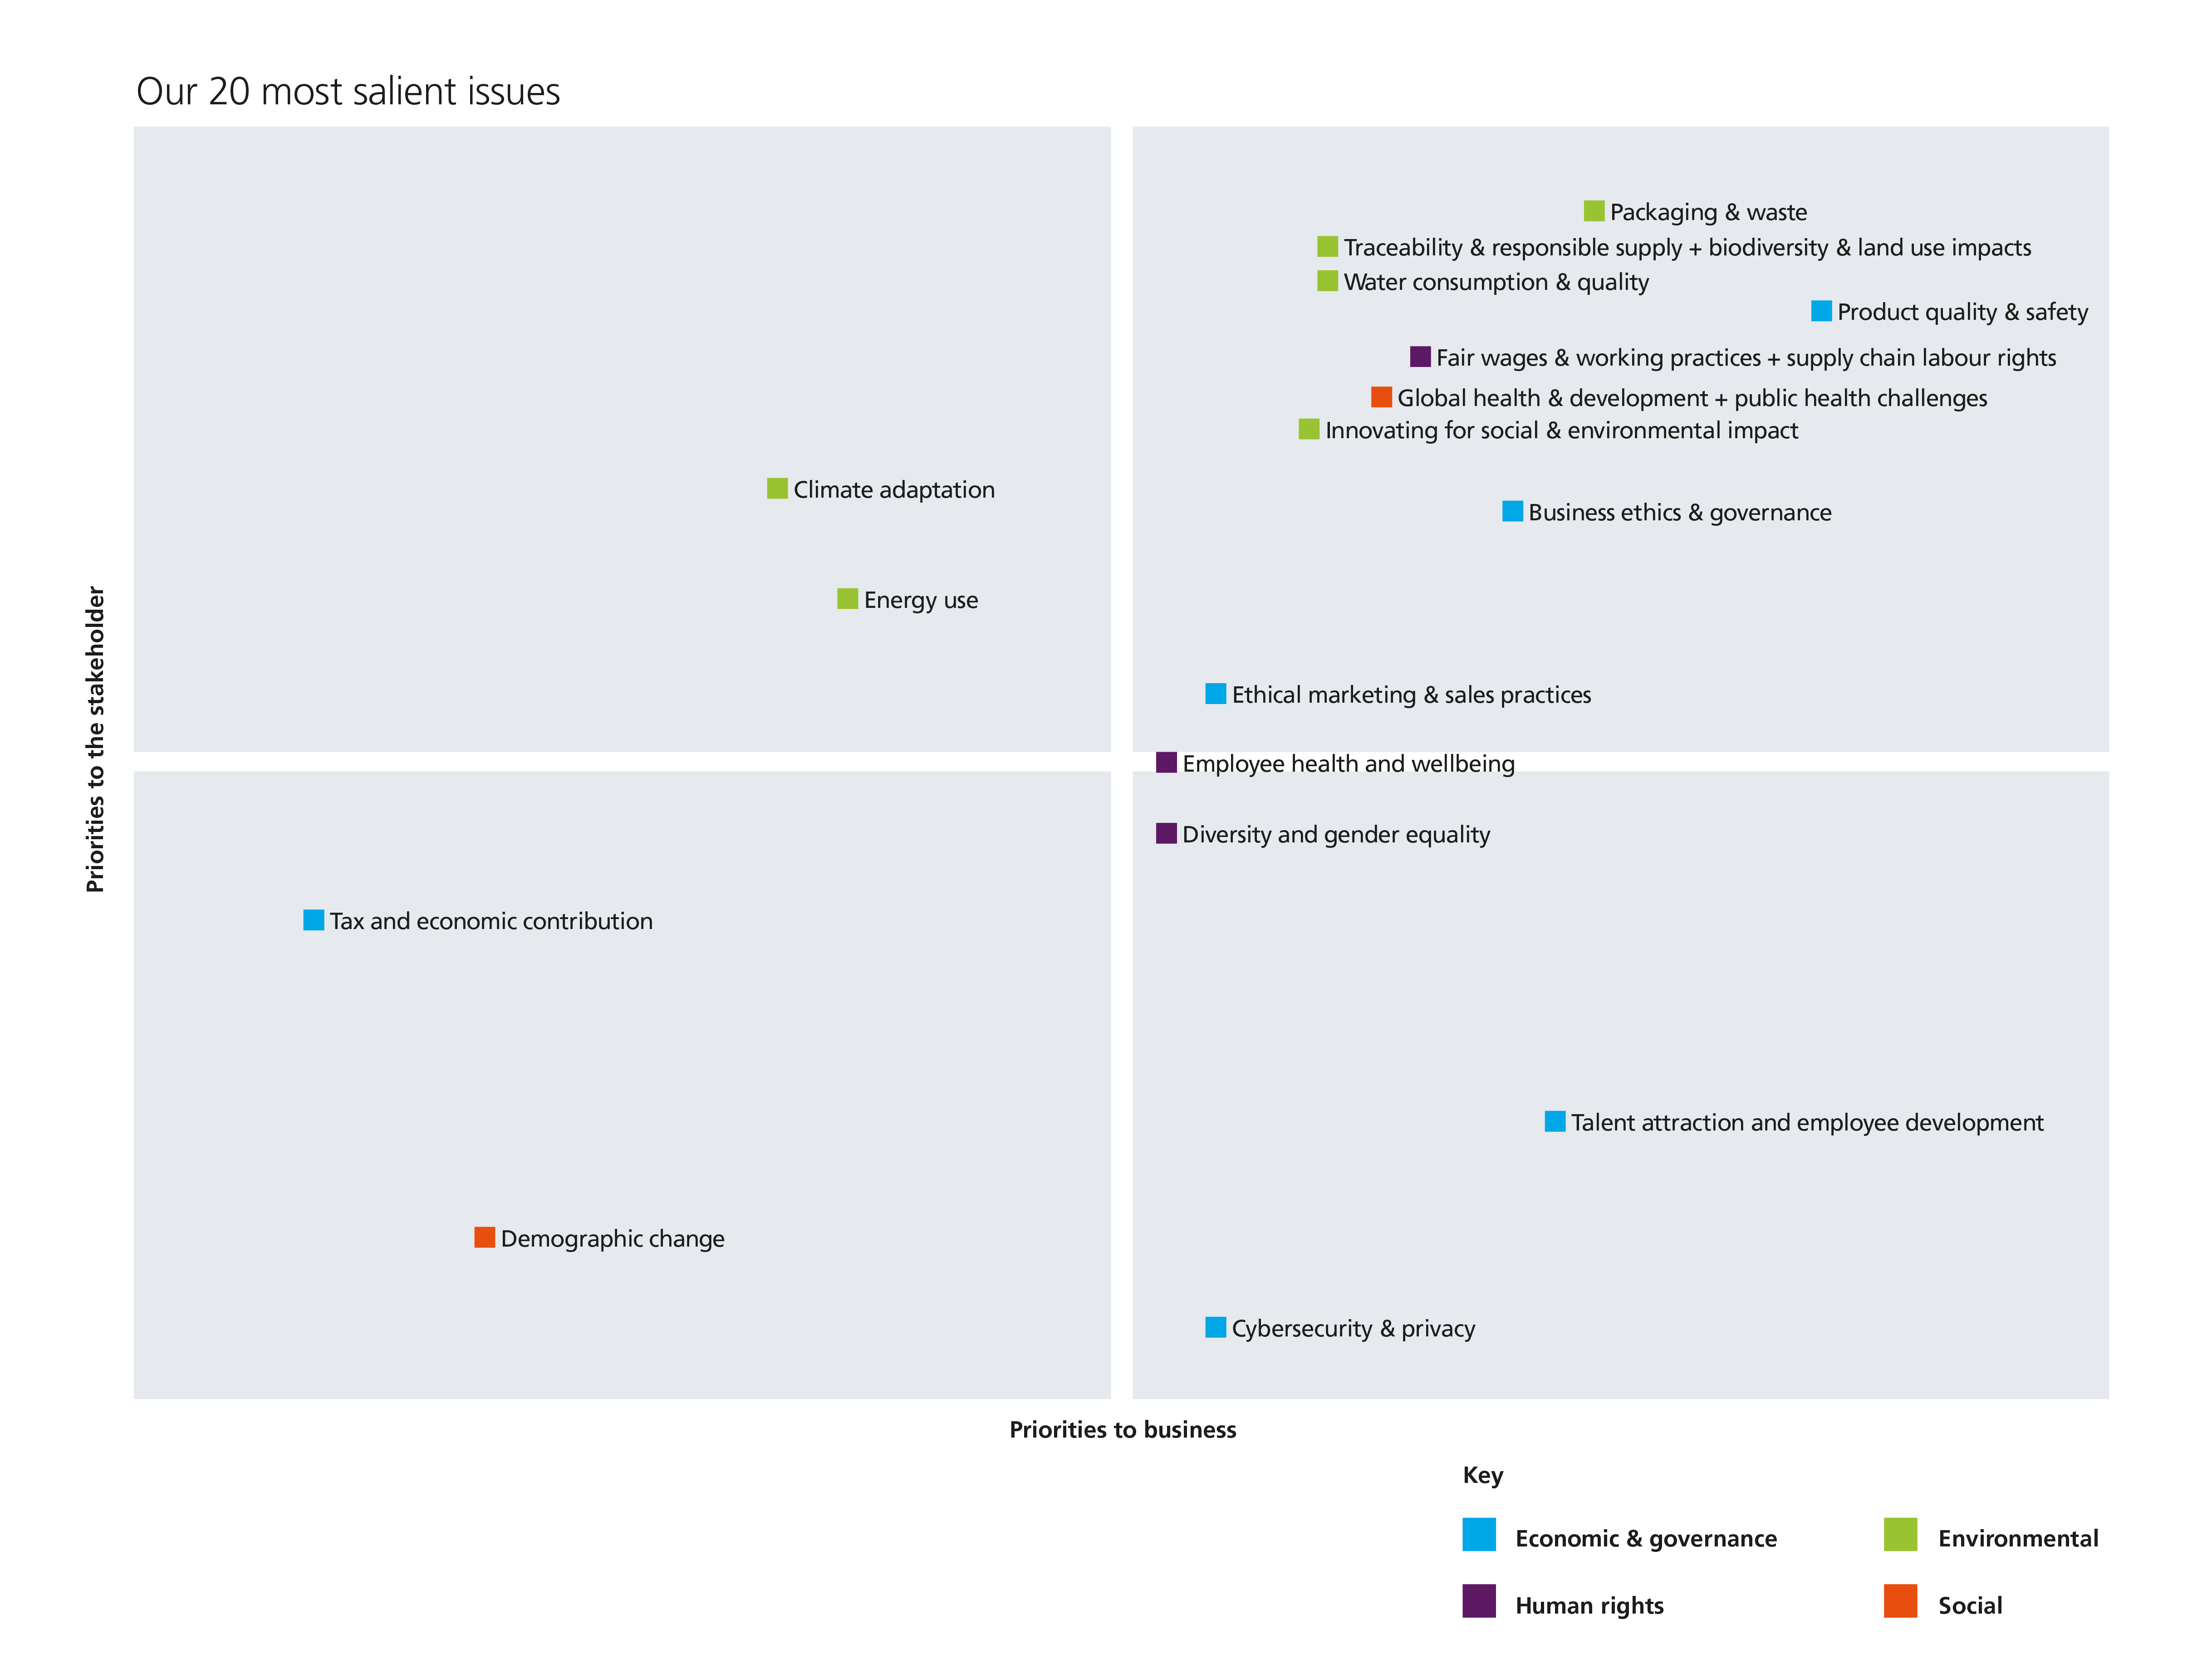 Materiality matrix used to measure 20 most salient issues to stakeholders and business